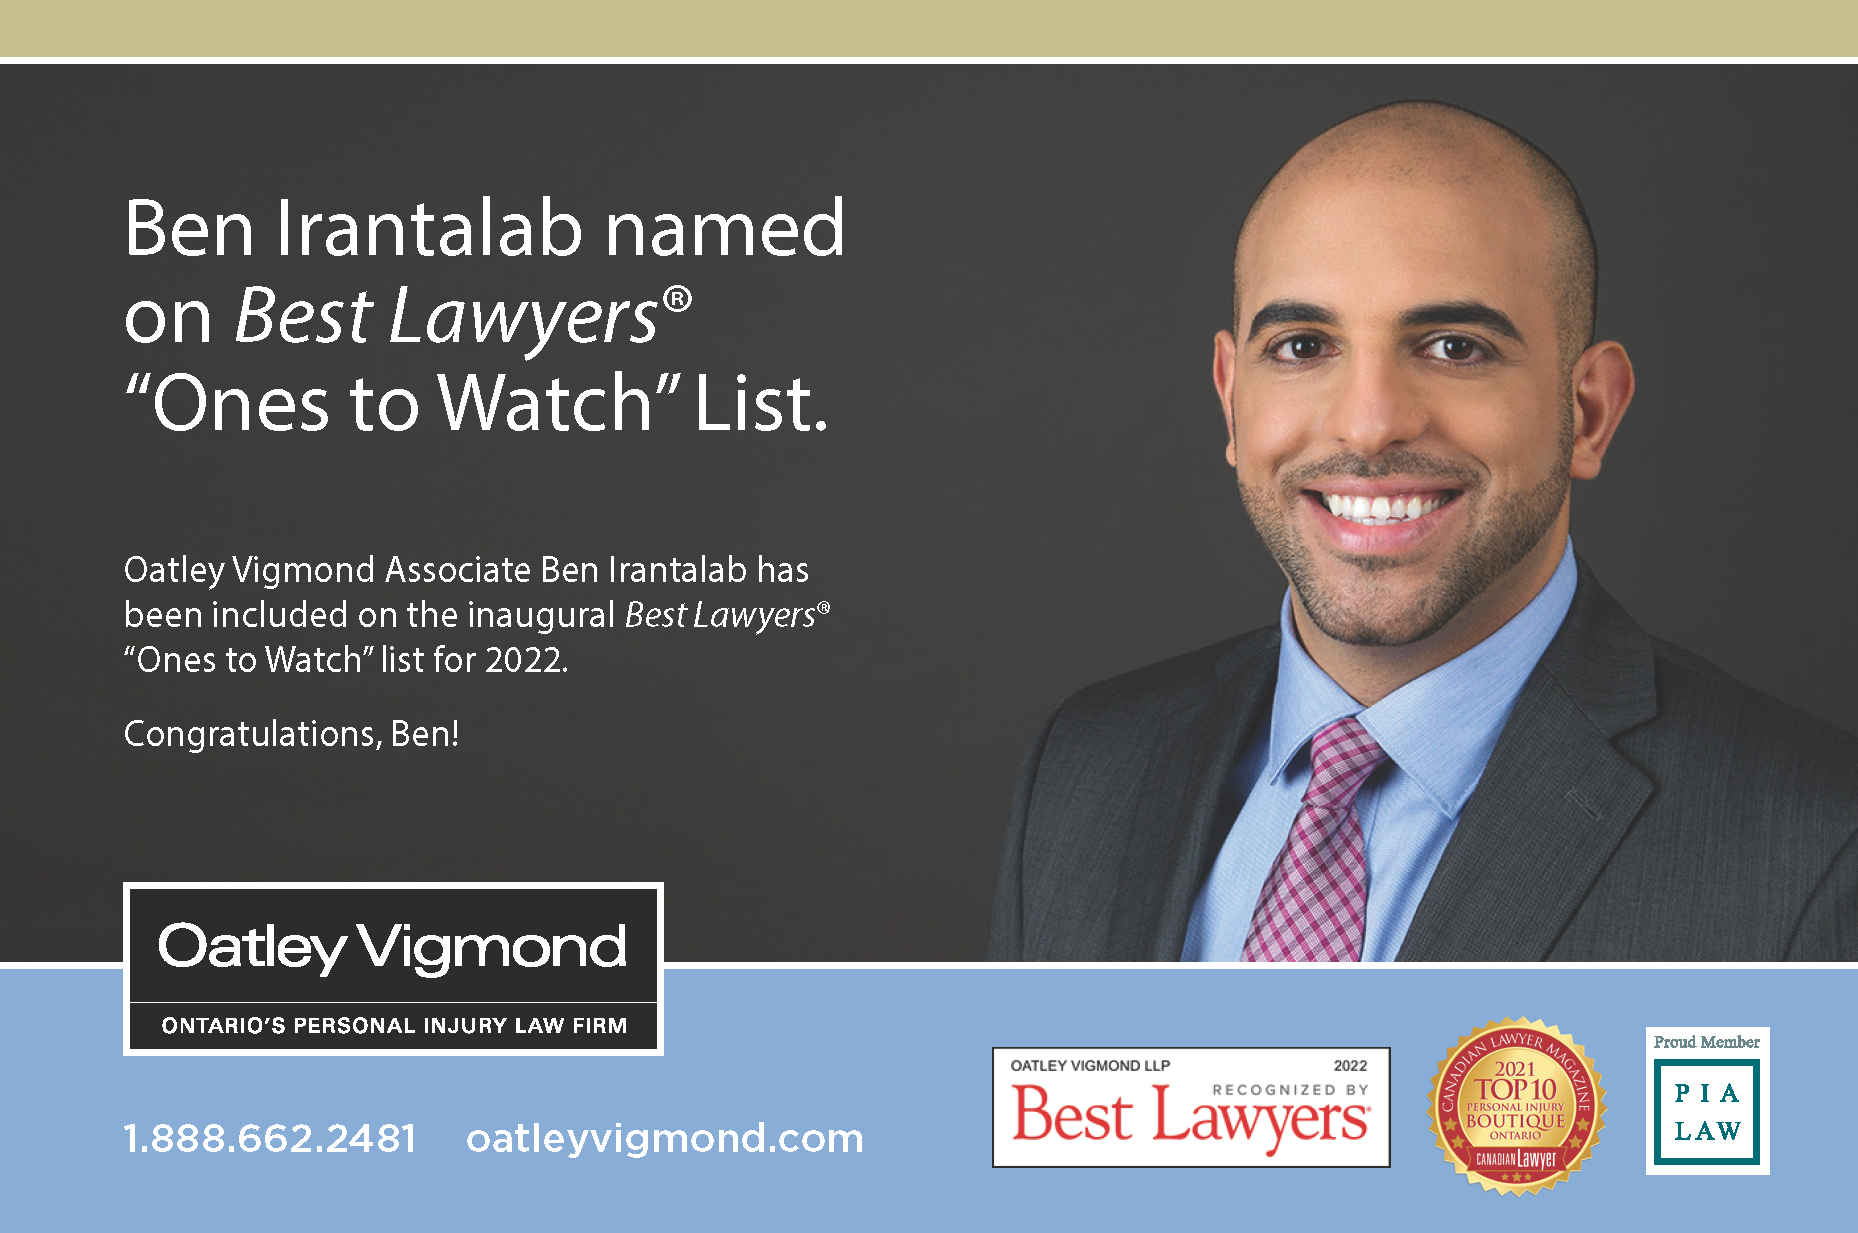 Ben Irantalab Named on Best Lawyers ® “Ones to Watch” List 2022